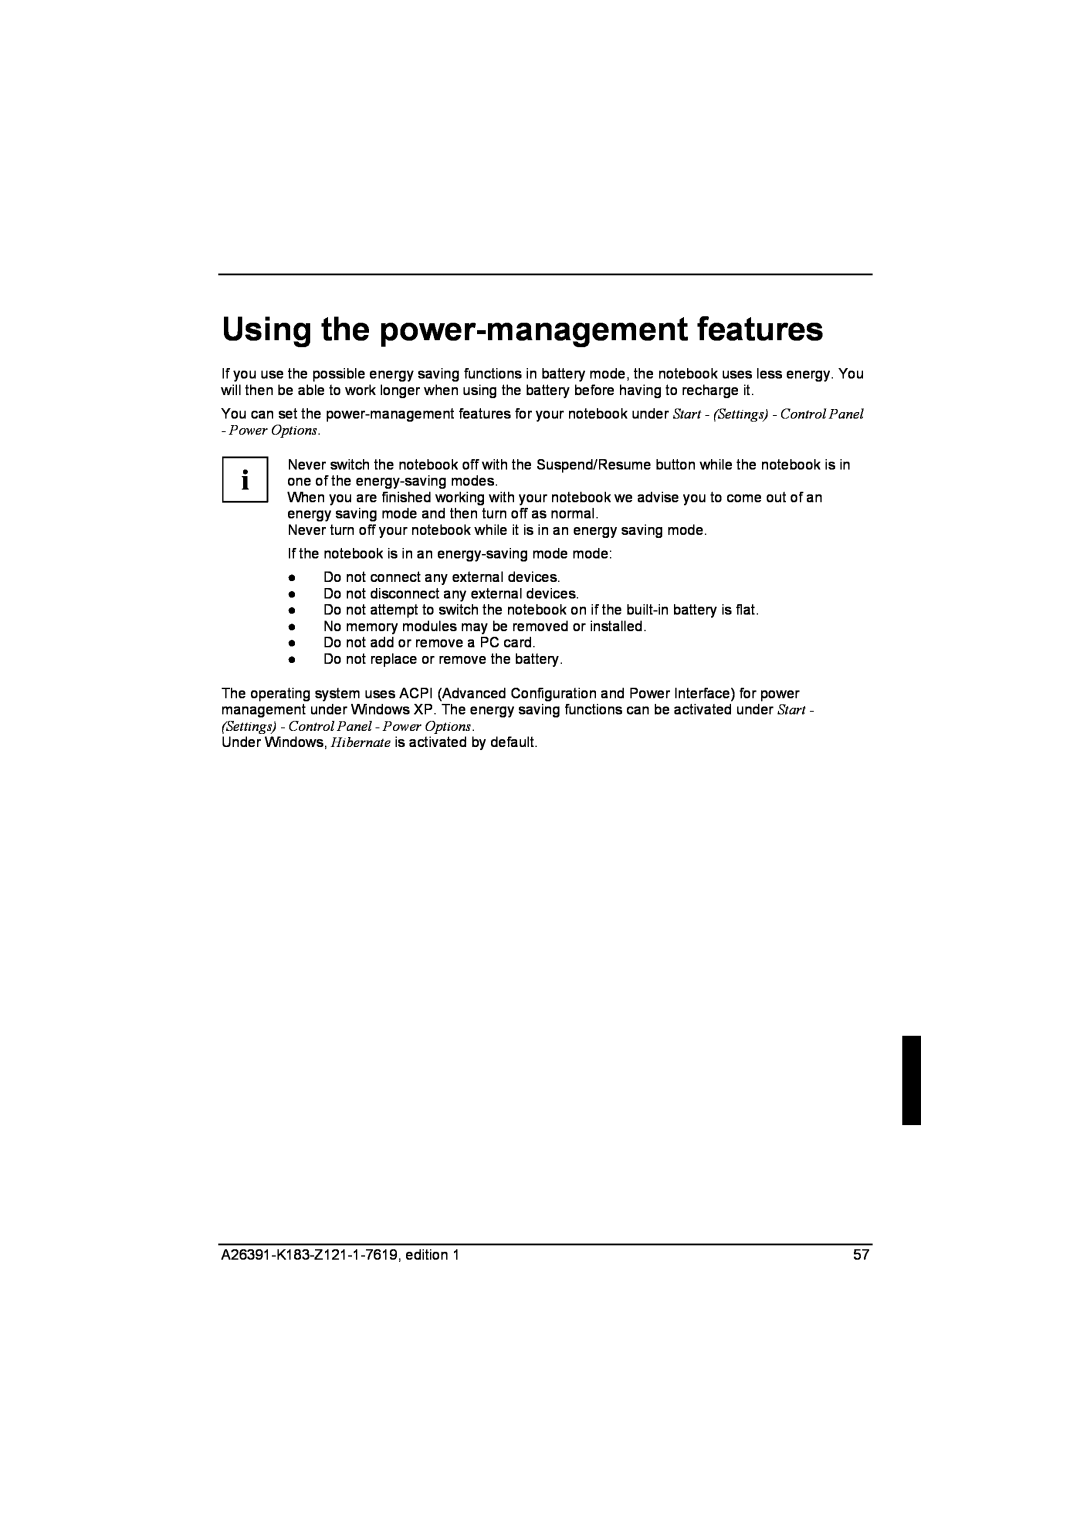 Fujitsu Siemens Computers V2035 manual Using the power-management features 